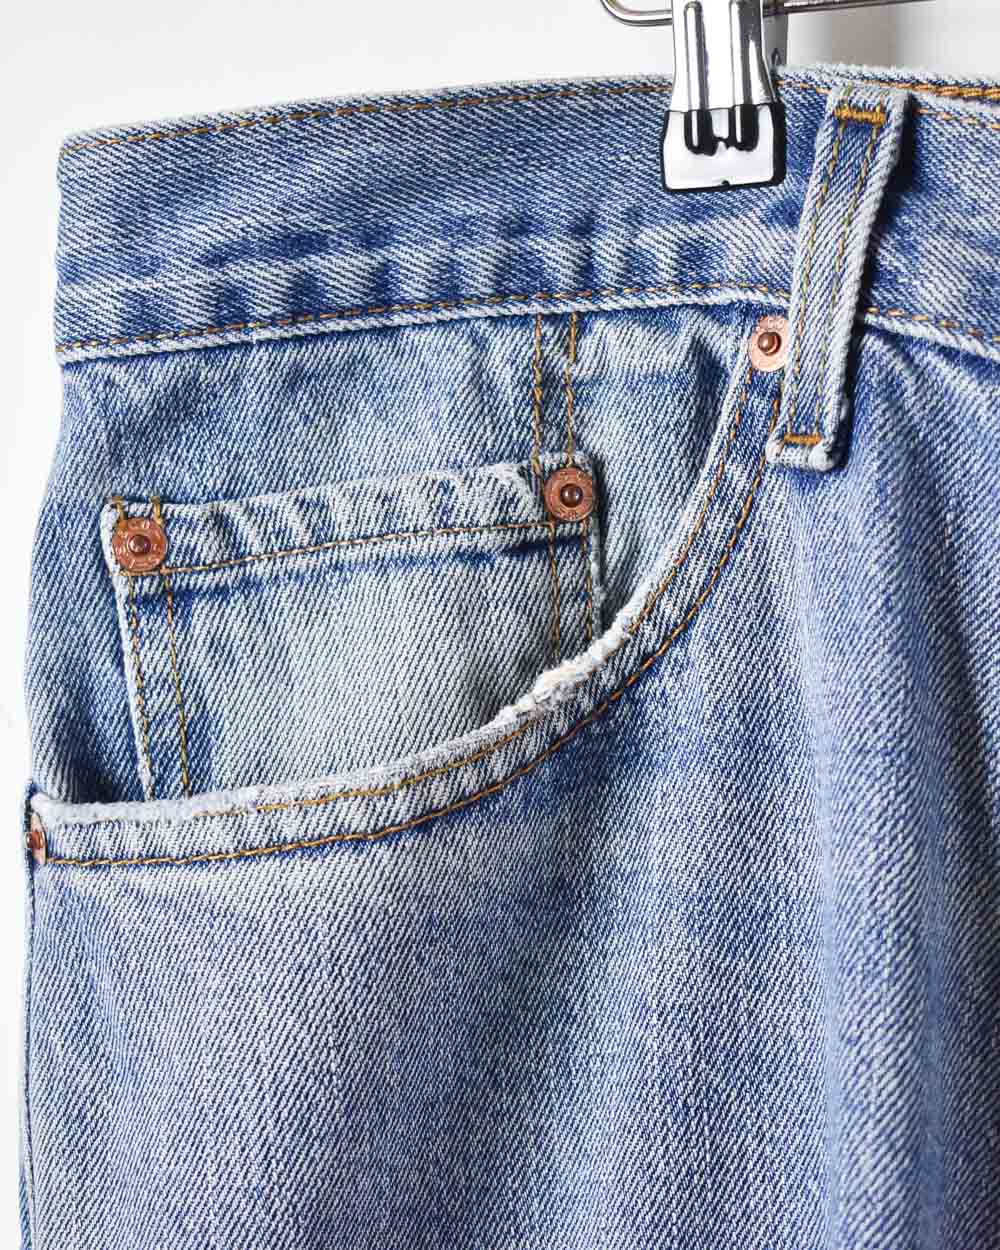 Blue Levi's Relaxed Fit 550 Jeans - W38 L29